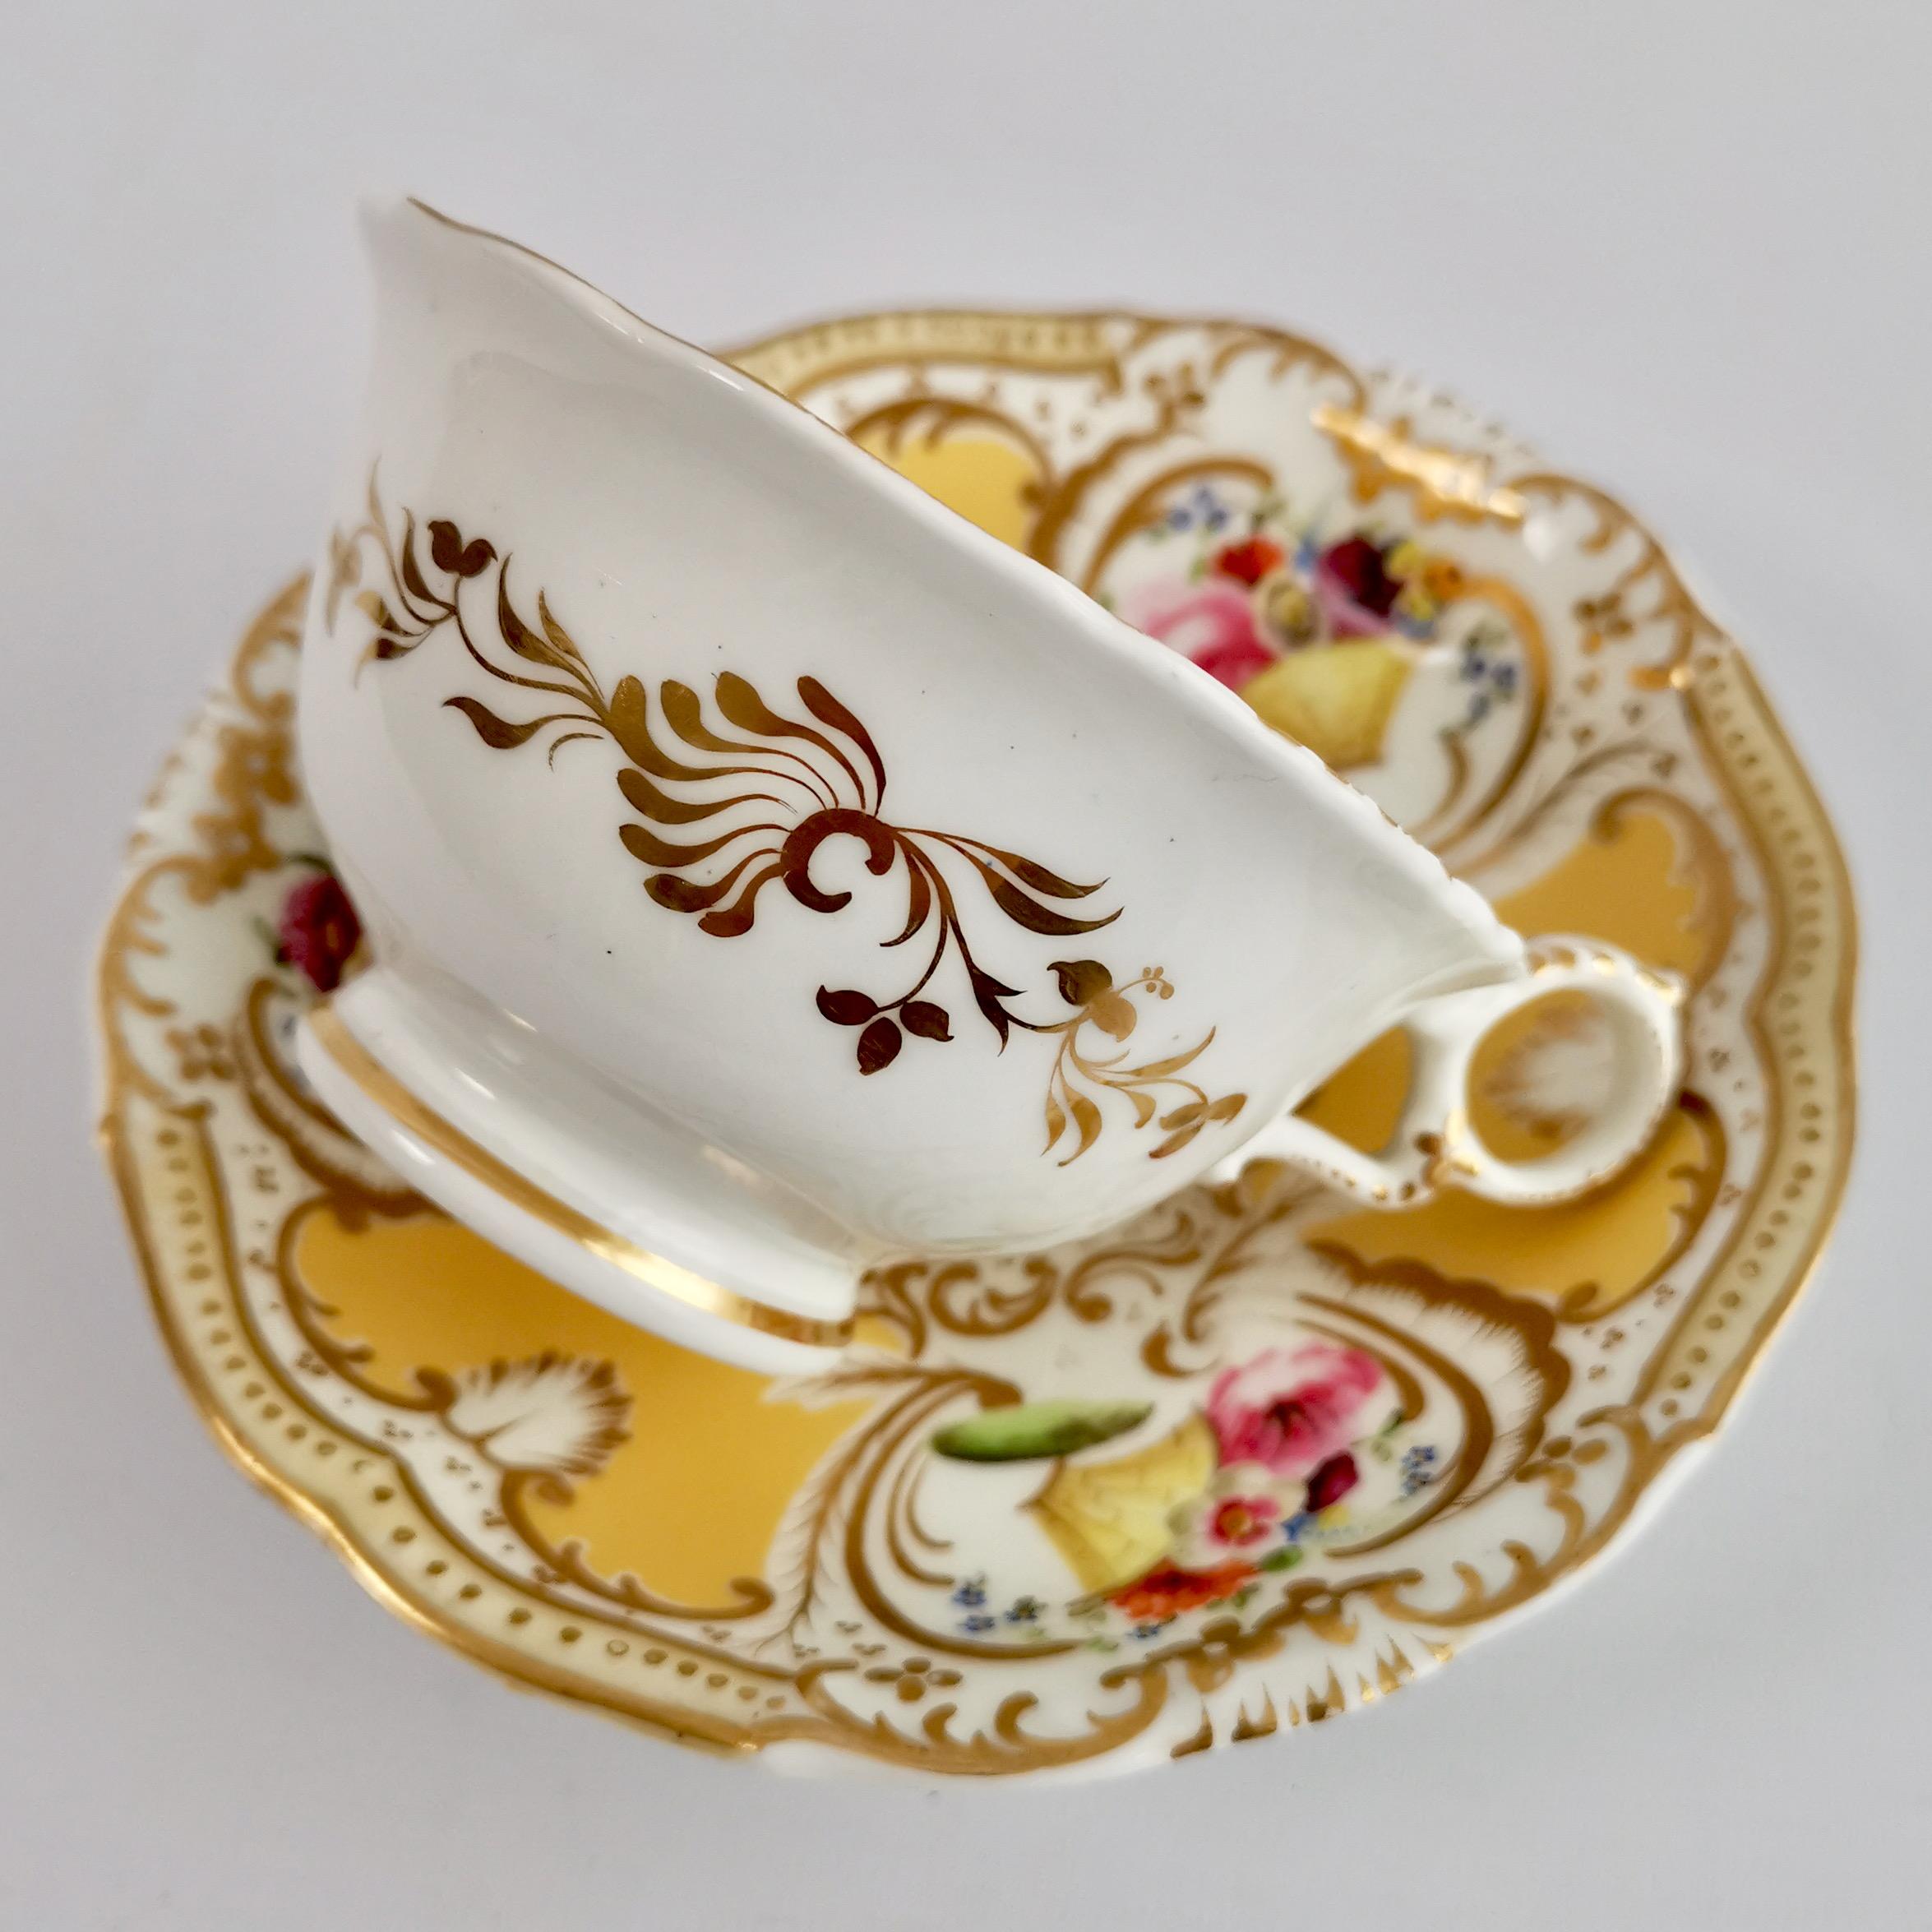 English Grainger Worcester Teacup, Yellow, Gilt and Flowers, Rococo Revival, circa 1835